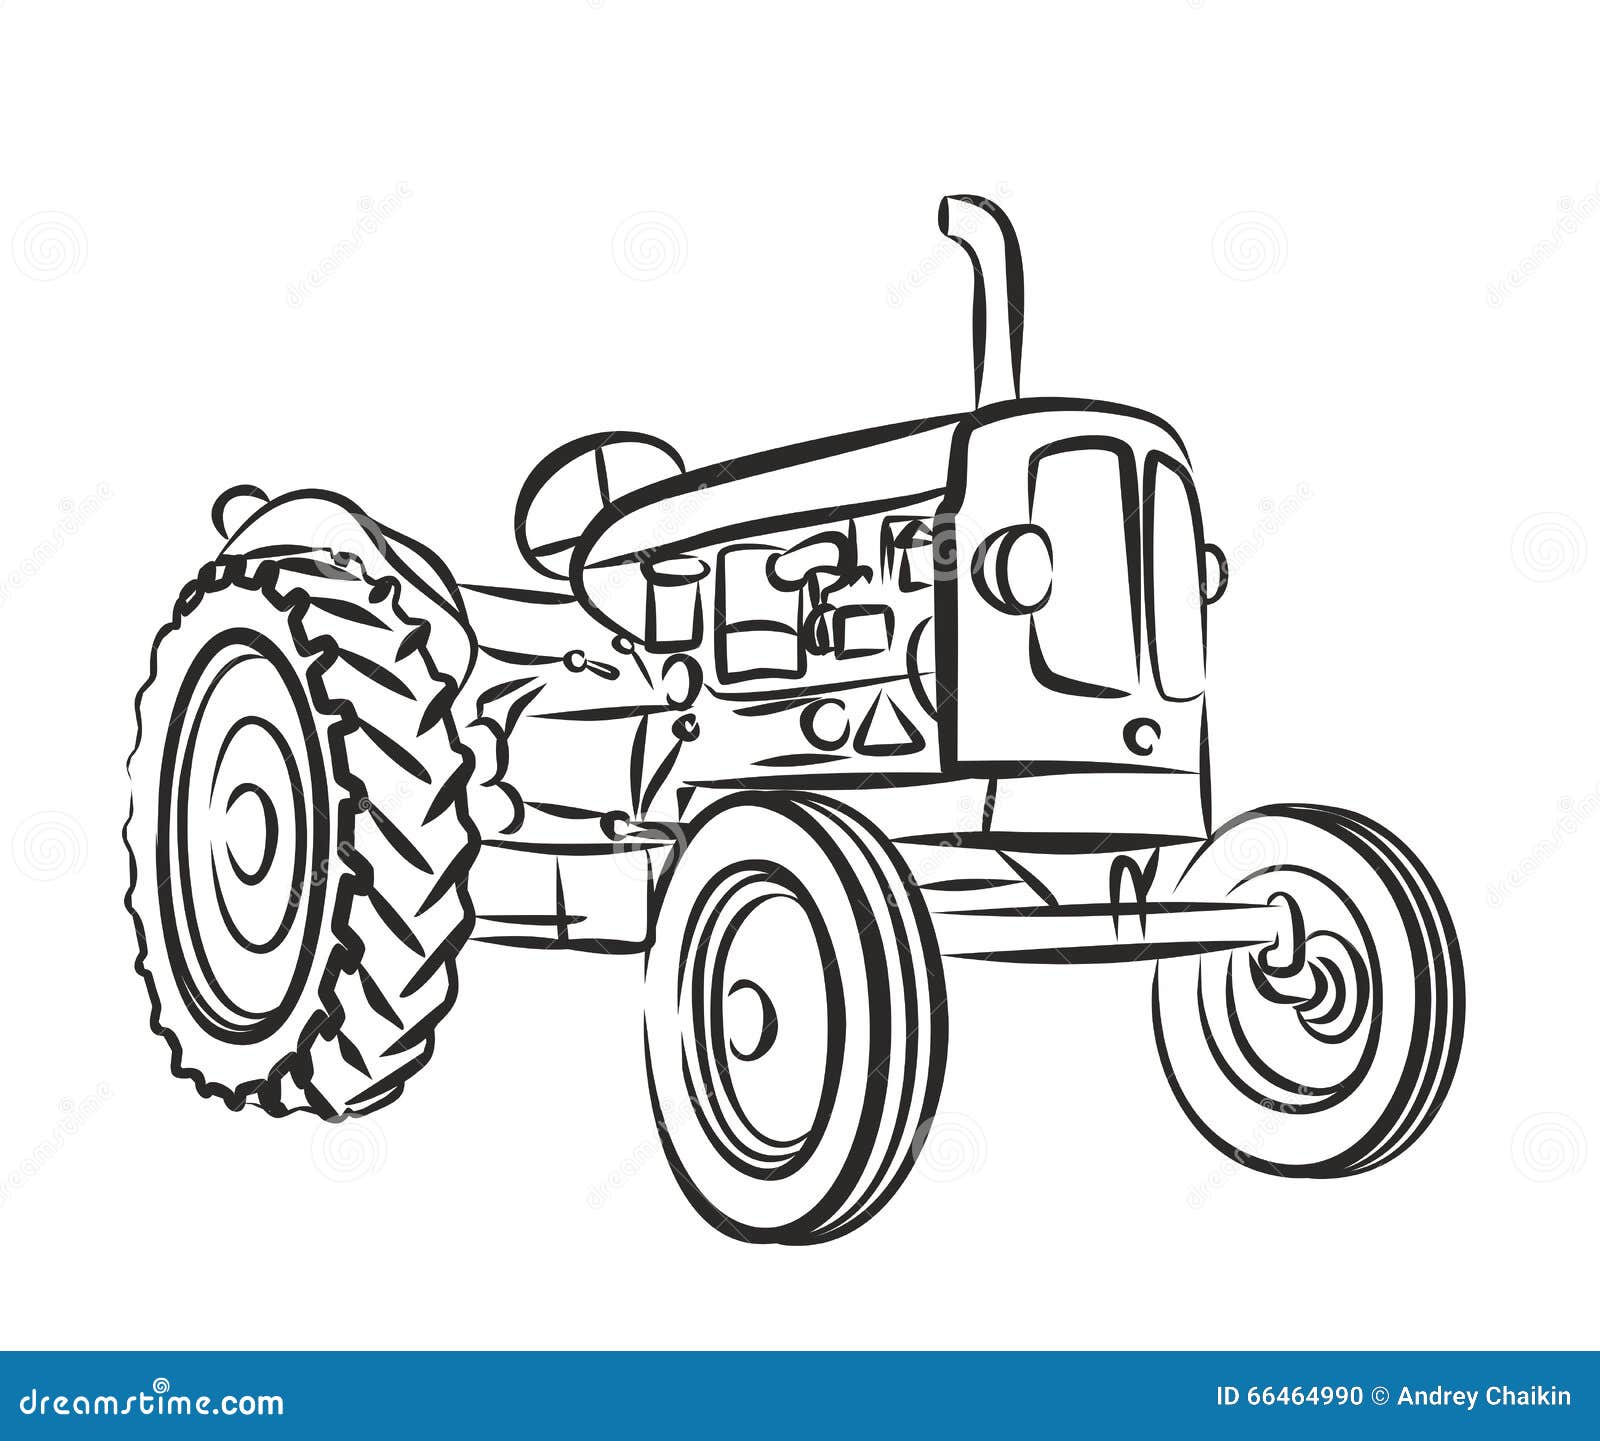 sketch of old tractor.